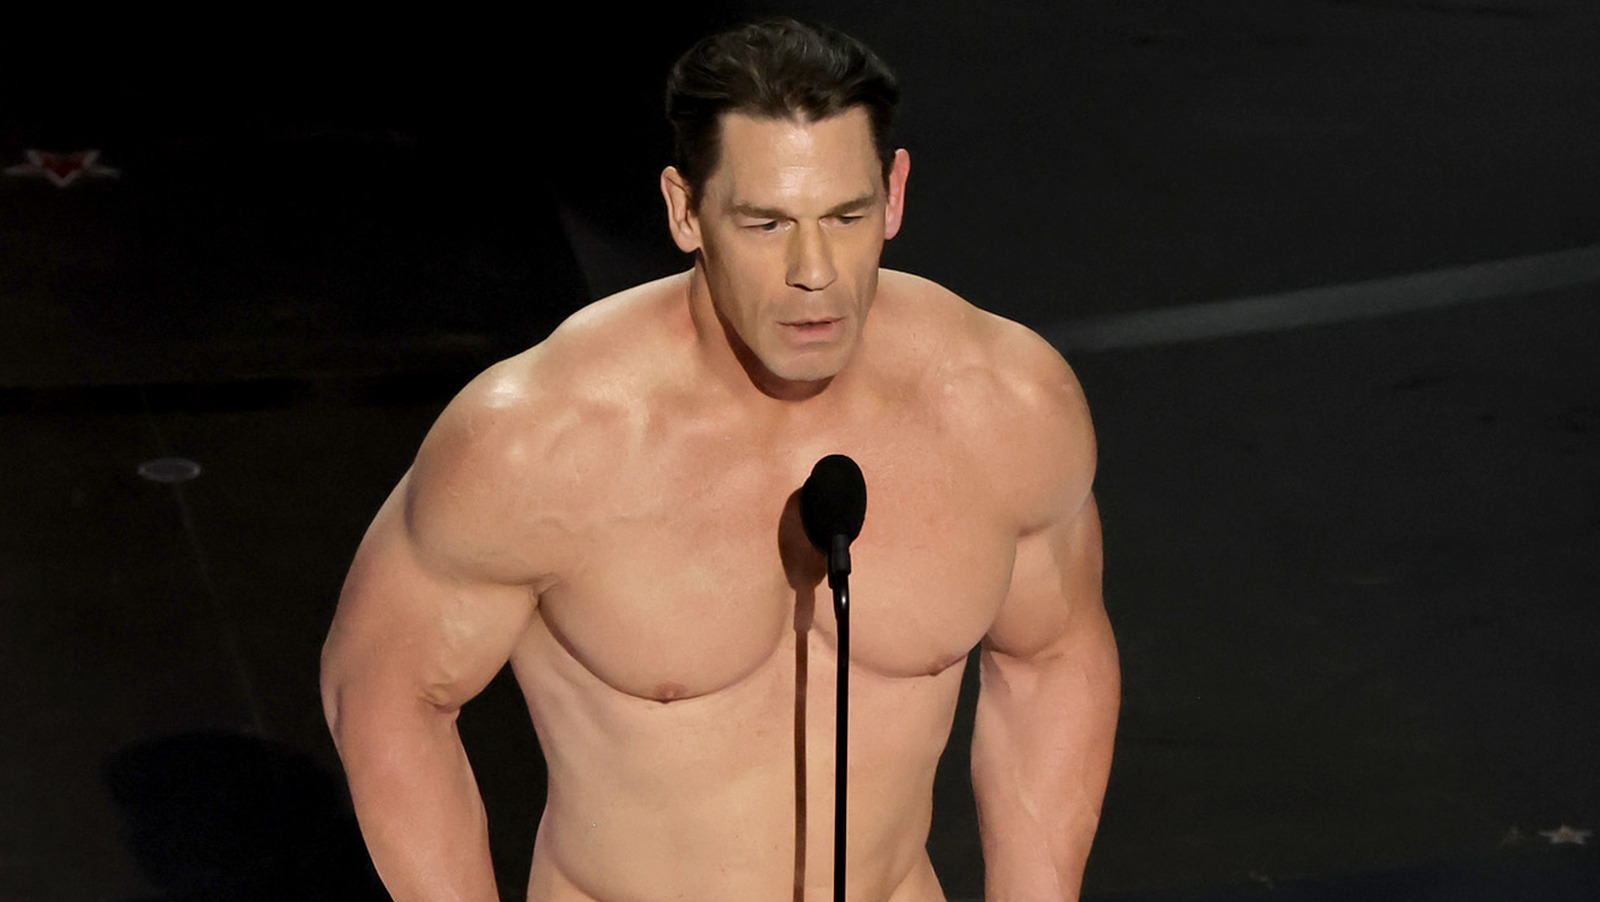 WWE's John Cena Discusses His Naked Oscars Moment And How Seriously He Takes Himself